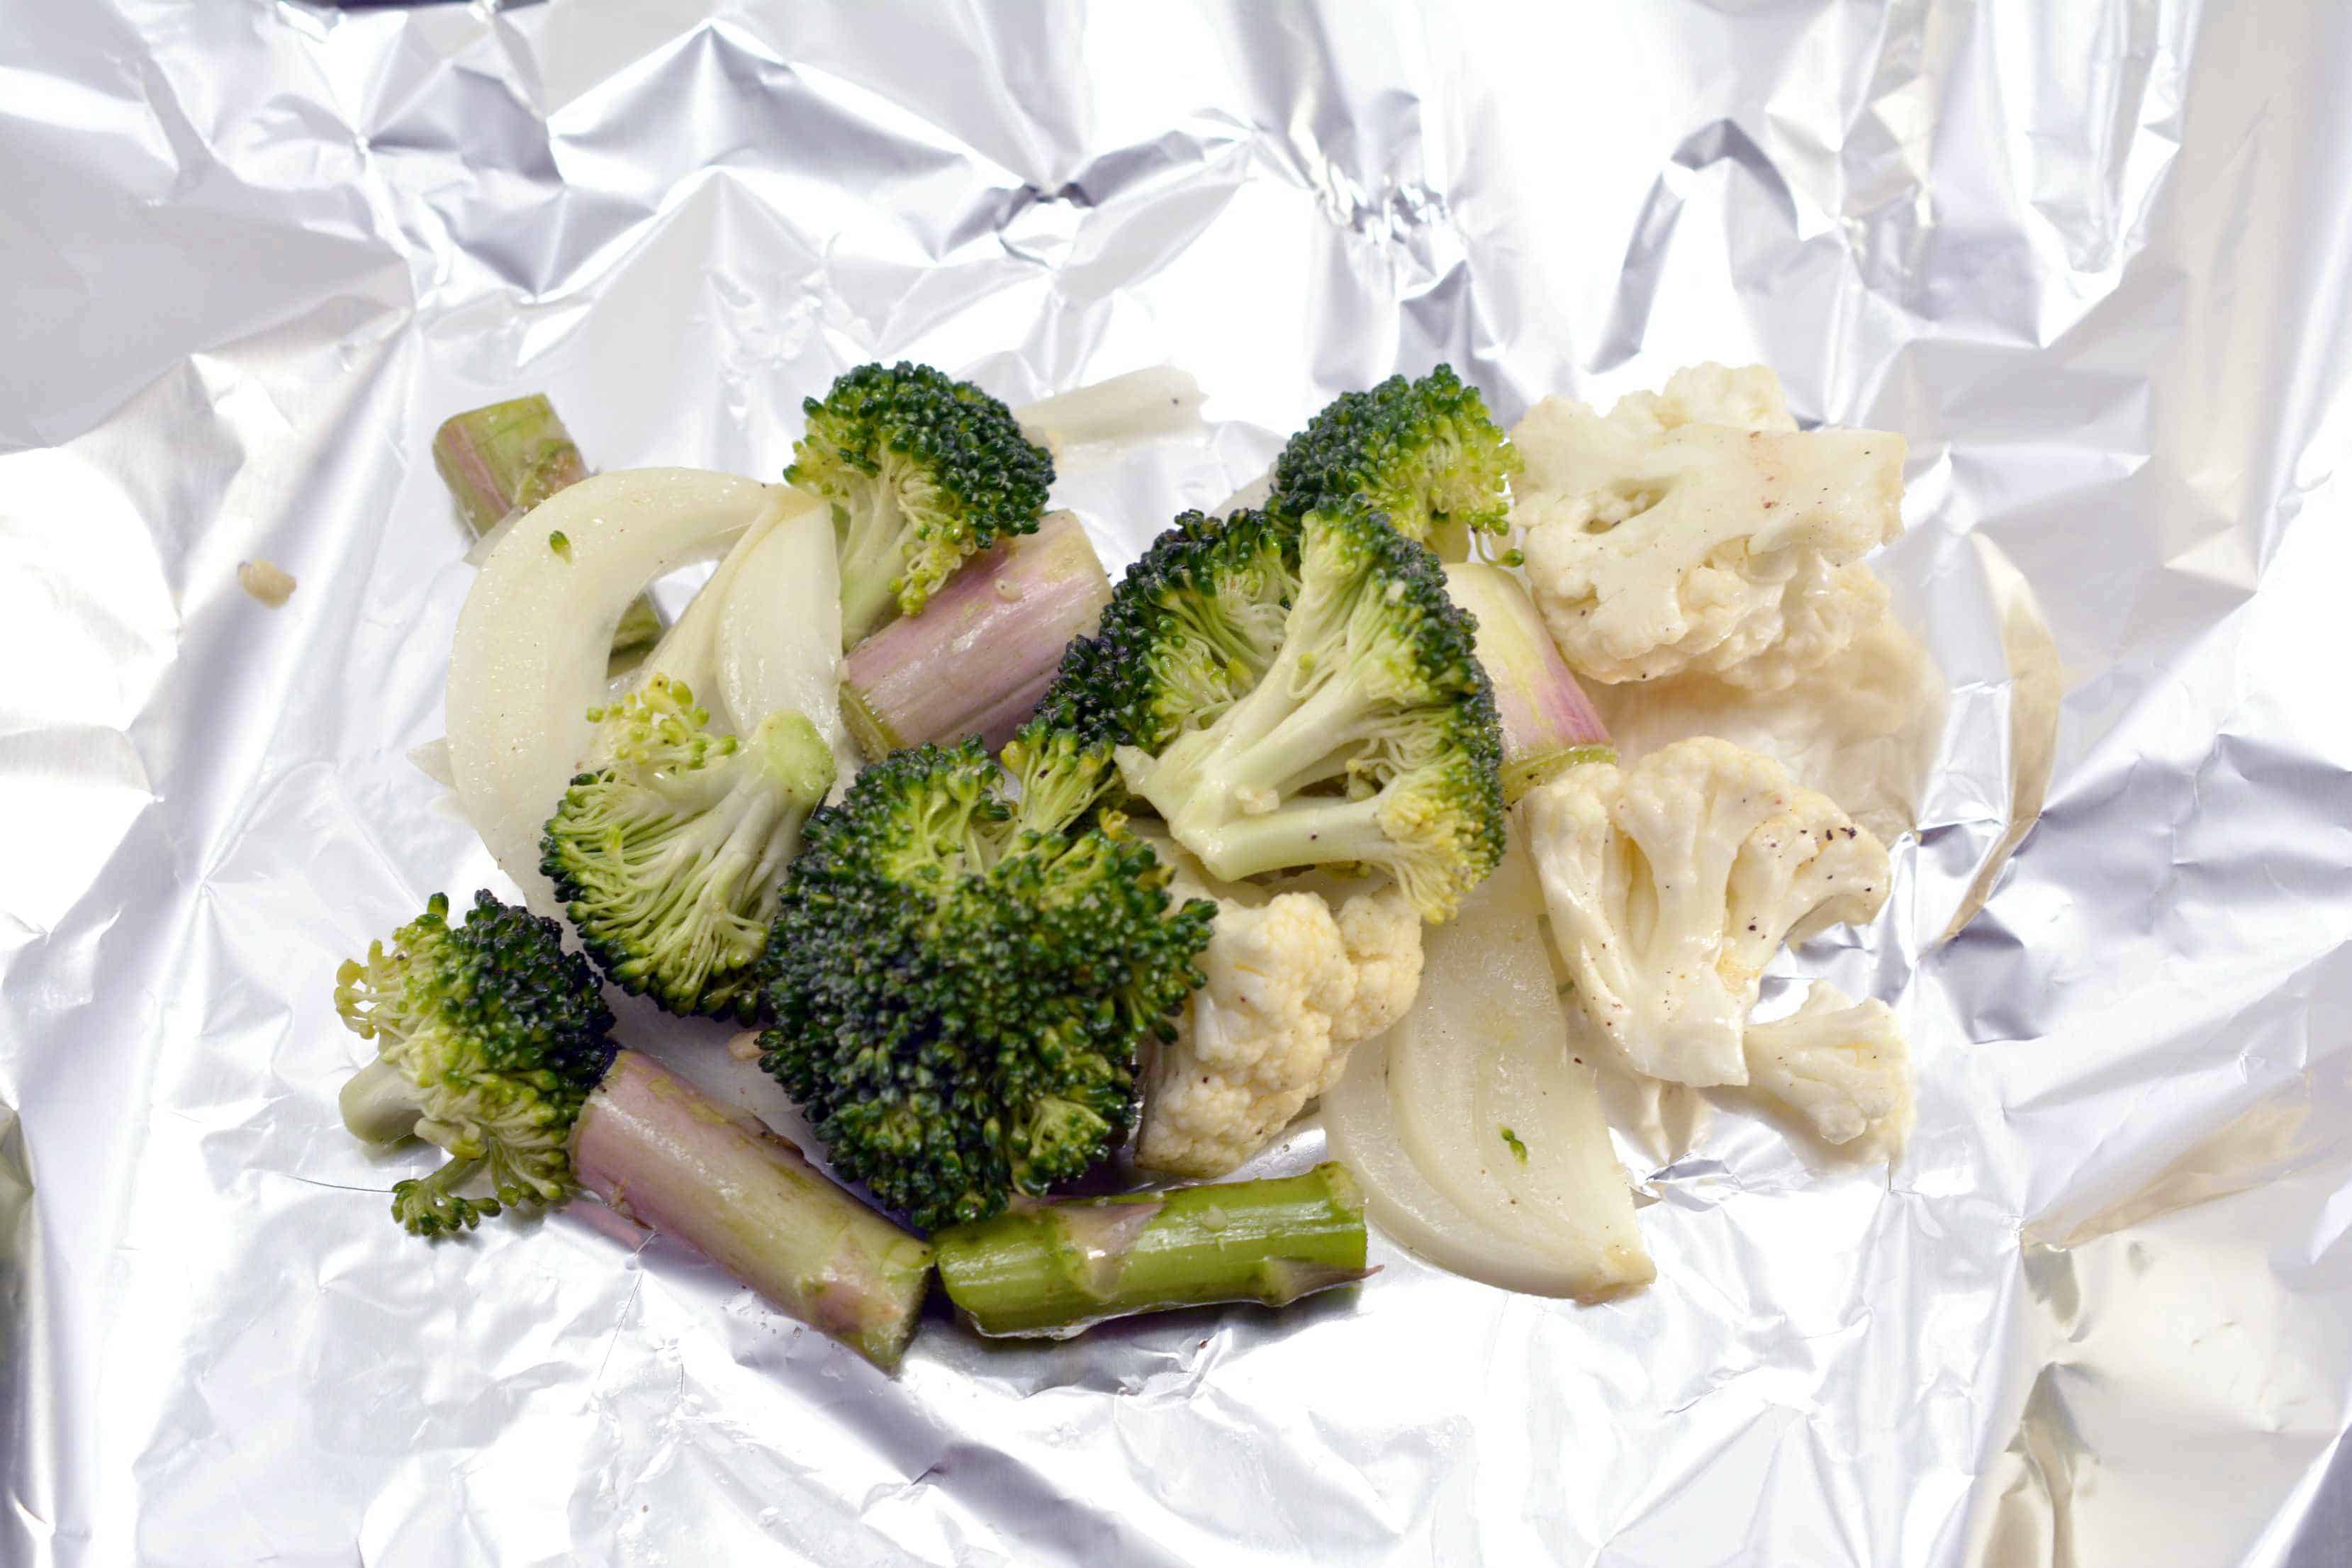 Add vegetables to the foil